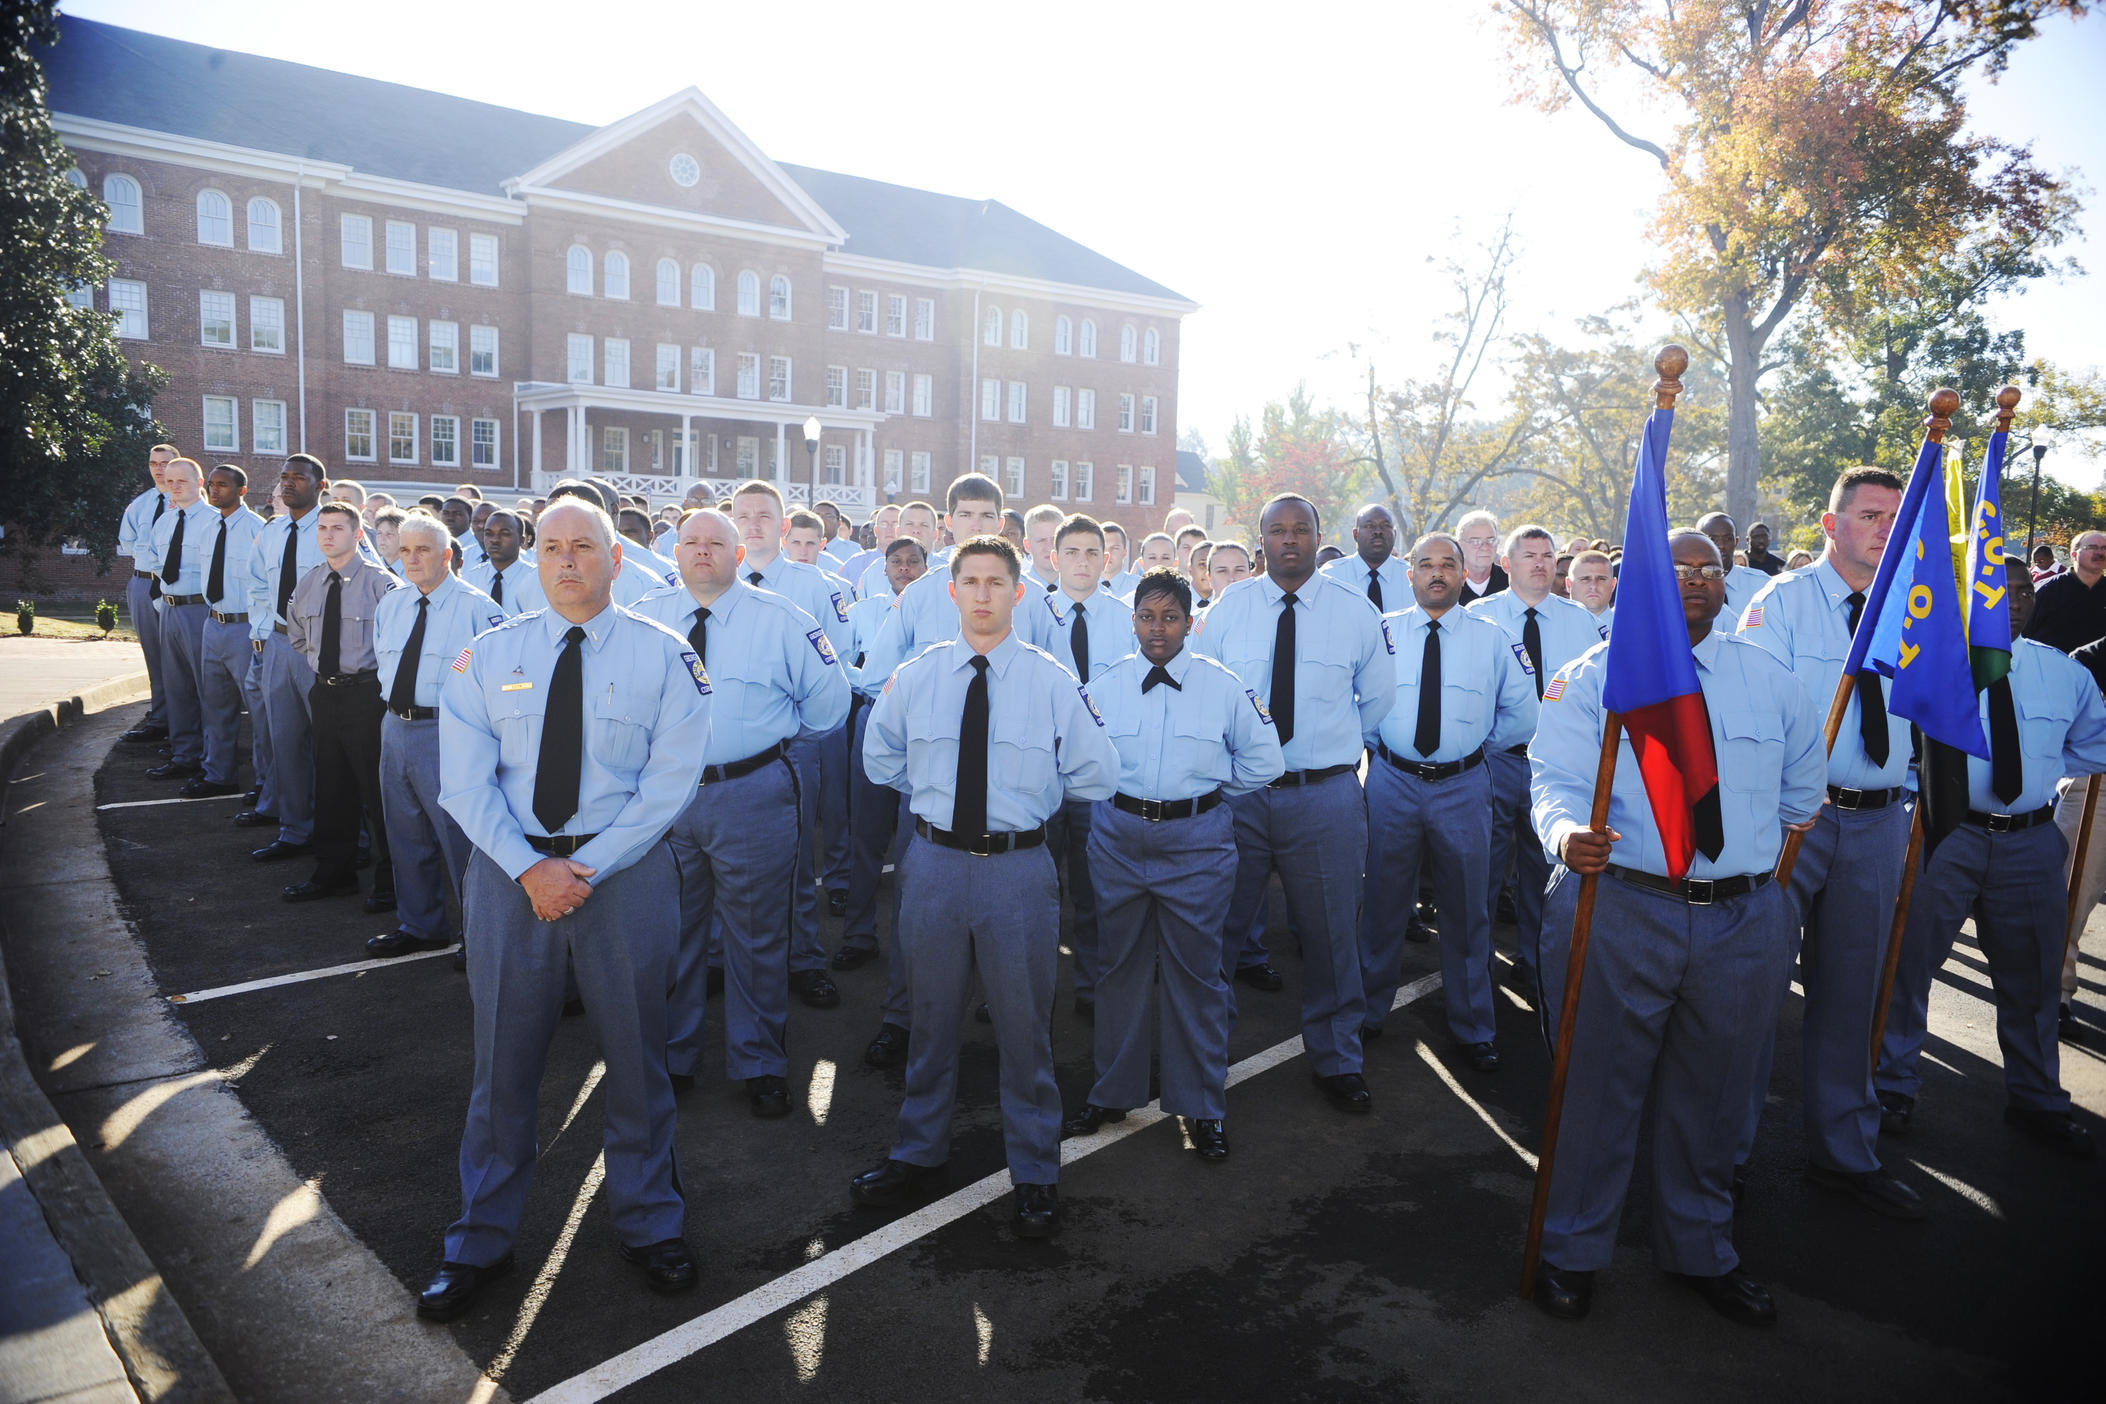 Georgia Department of Corrections cadets and trainers before the 2010 ribbon cutting for the department's training facility and offices in Forsyth. A labor strike of the incarcerated would come about month later. GDC lost over 2,000 correctional officers in the following year. 